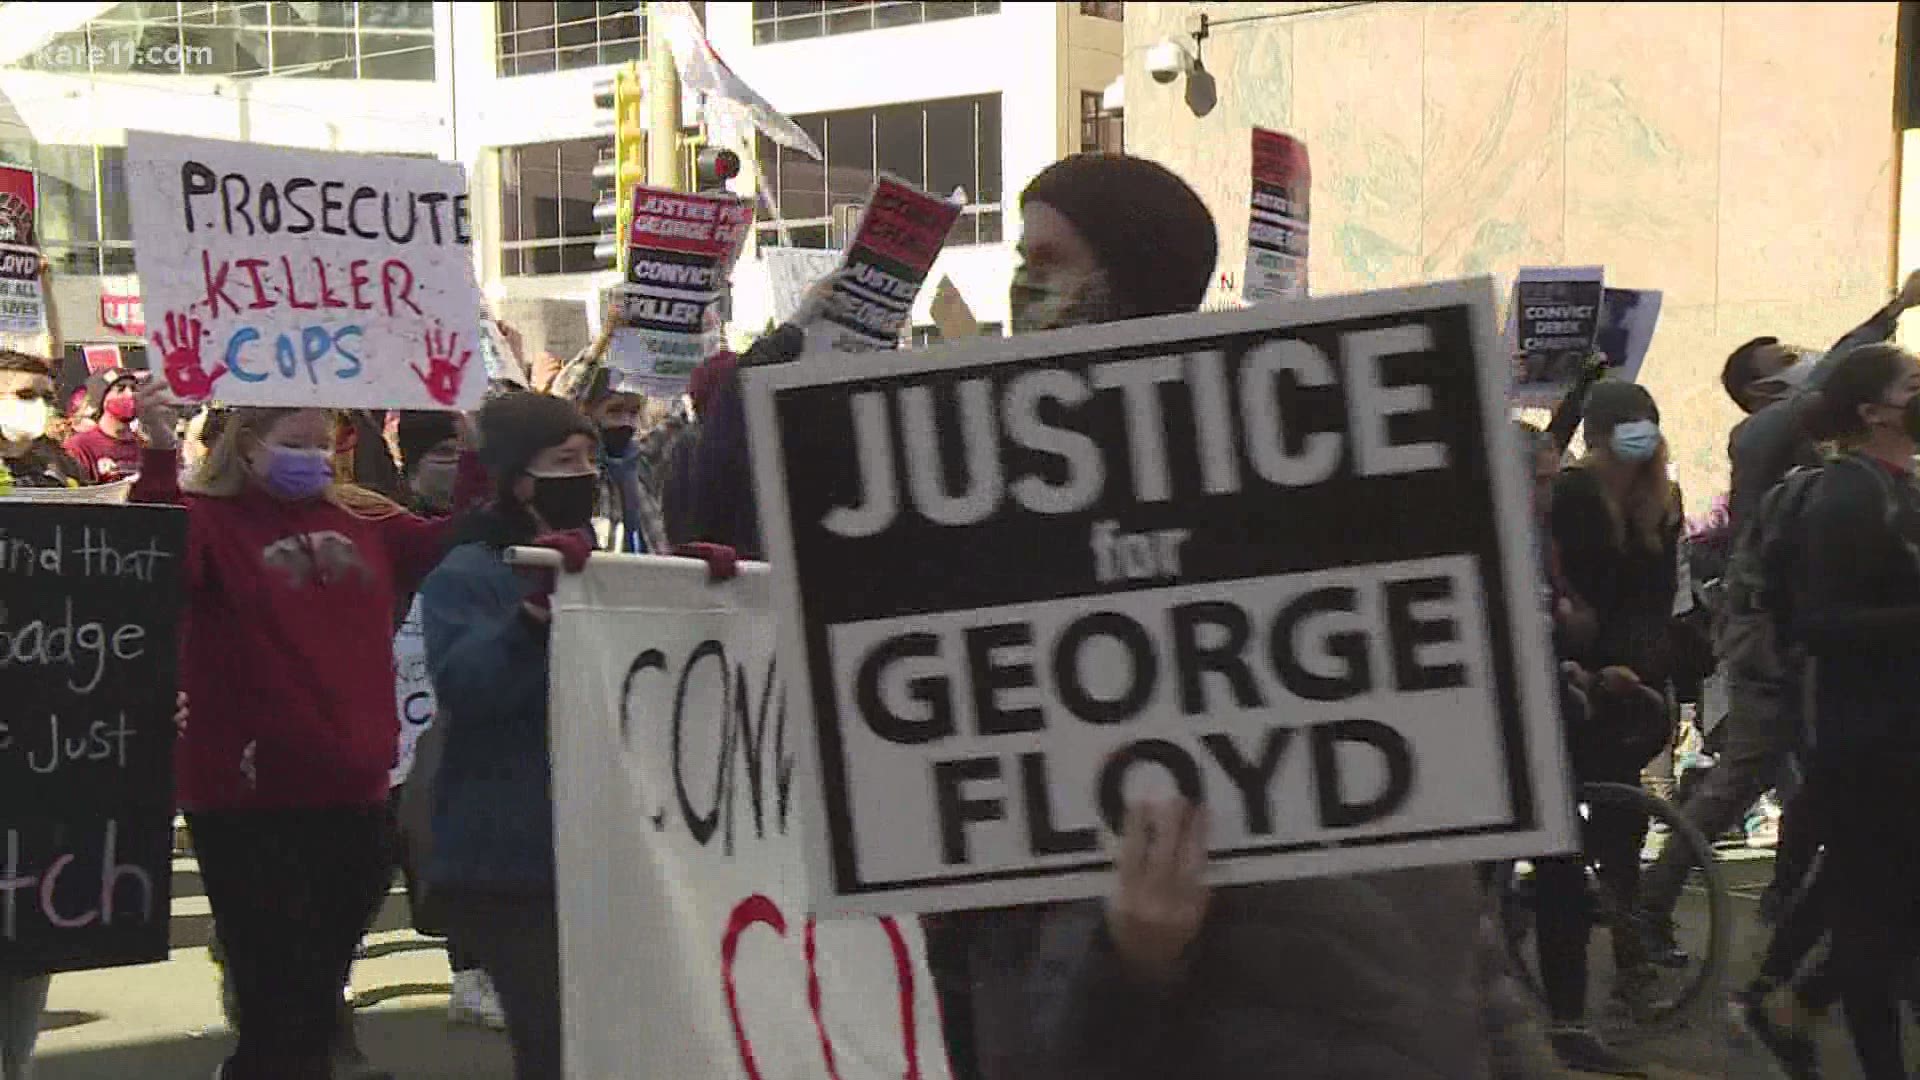 Demonstrators carried a banner reading "Justice 4 George & all stolen lives; the world is watching".